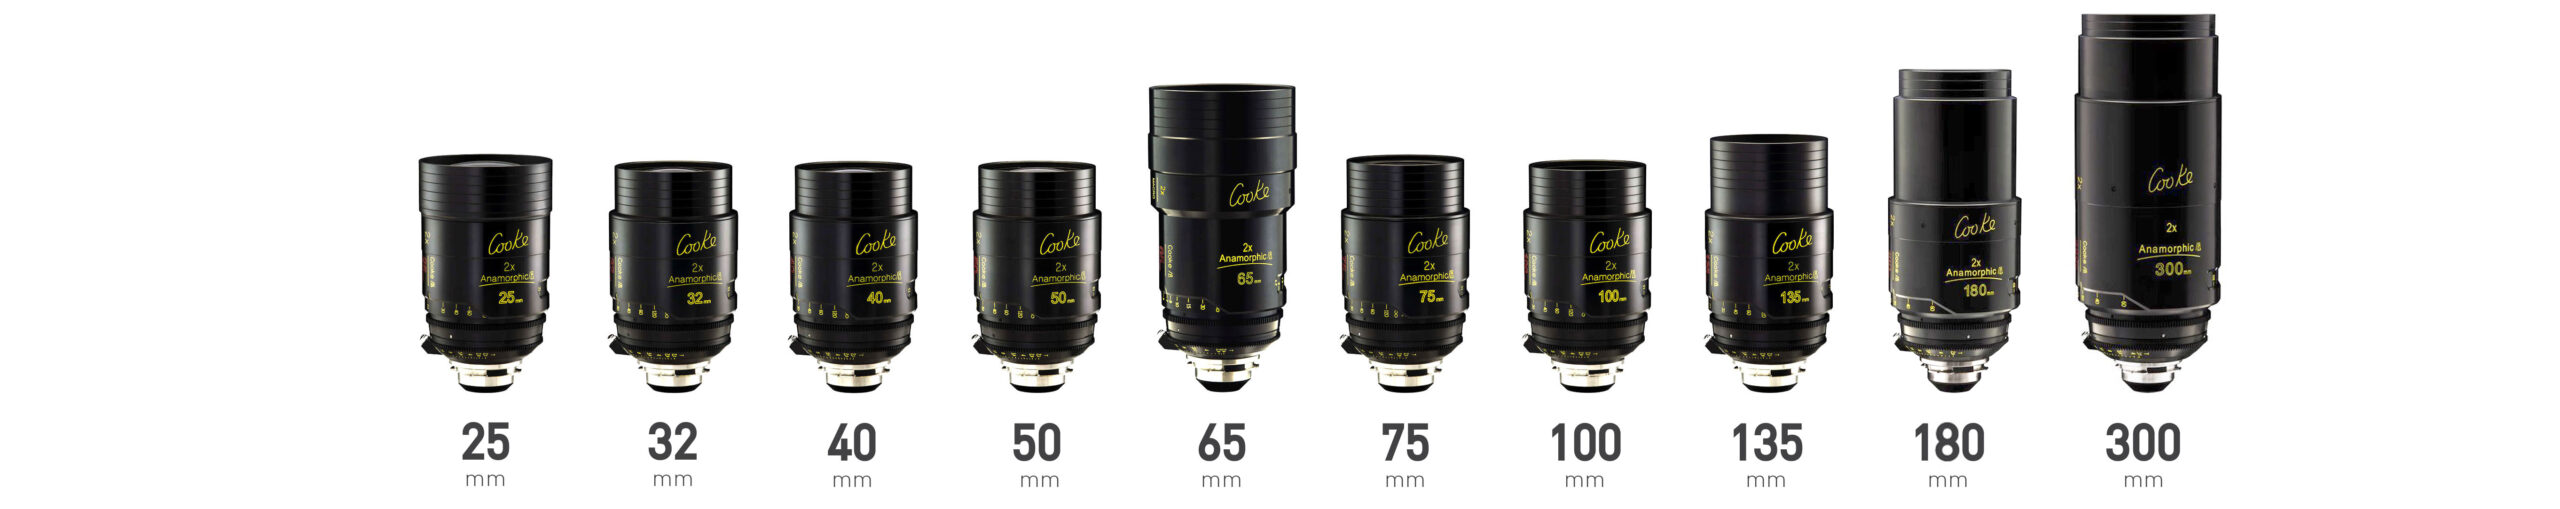 Cooke Anamorphic 2x S35 Prime Lens Line Up